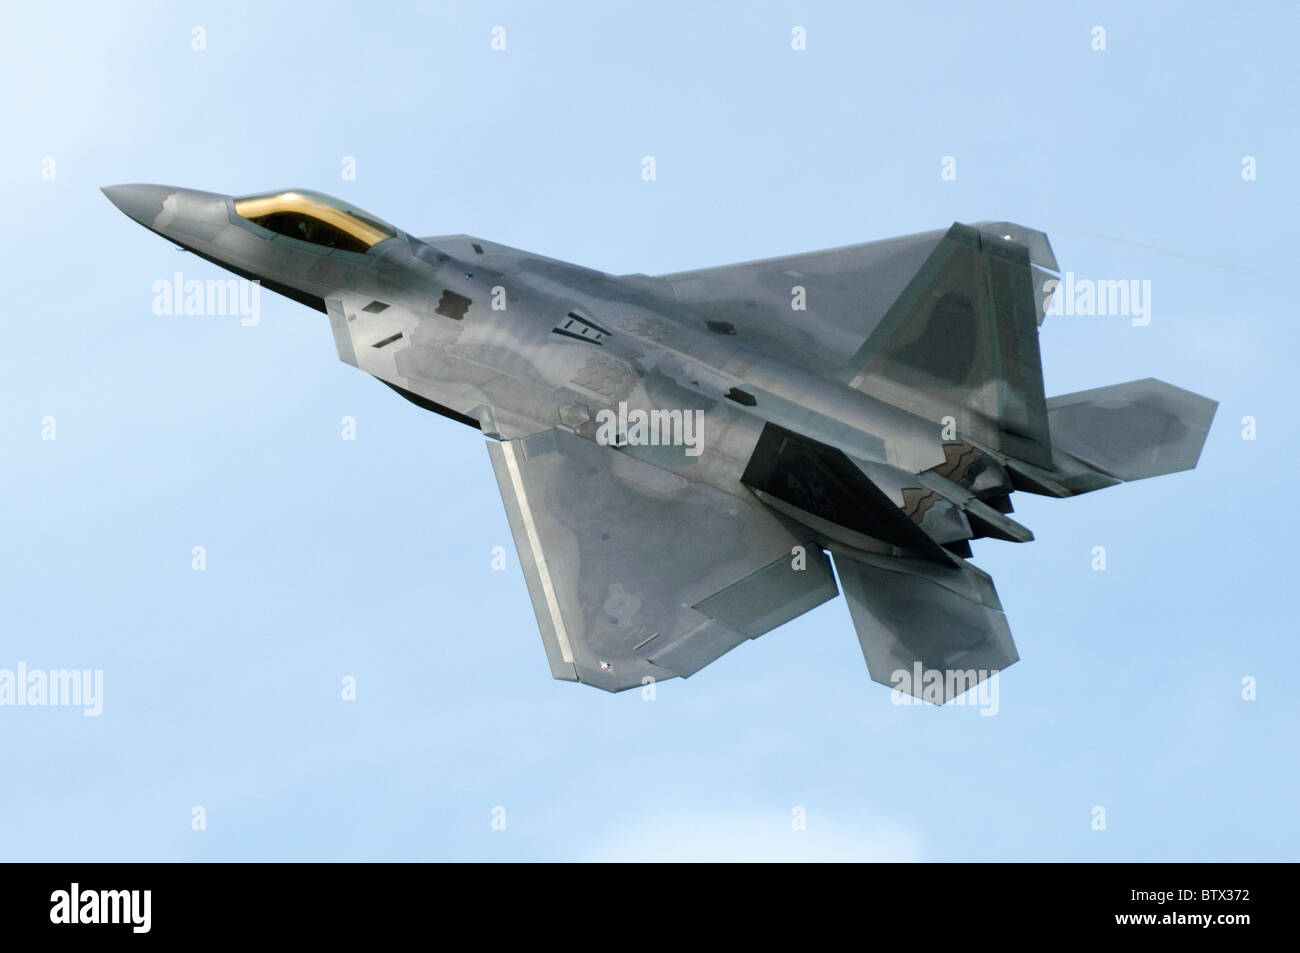 F-22 Raptor aircraft operated by the US Air Force departing RAF Fairford, UK. Aircraft is a Lockheed Martin F-22A Raptor. Stock Photo